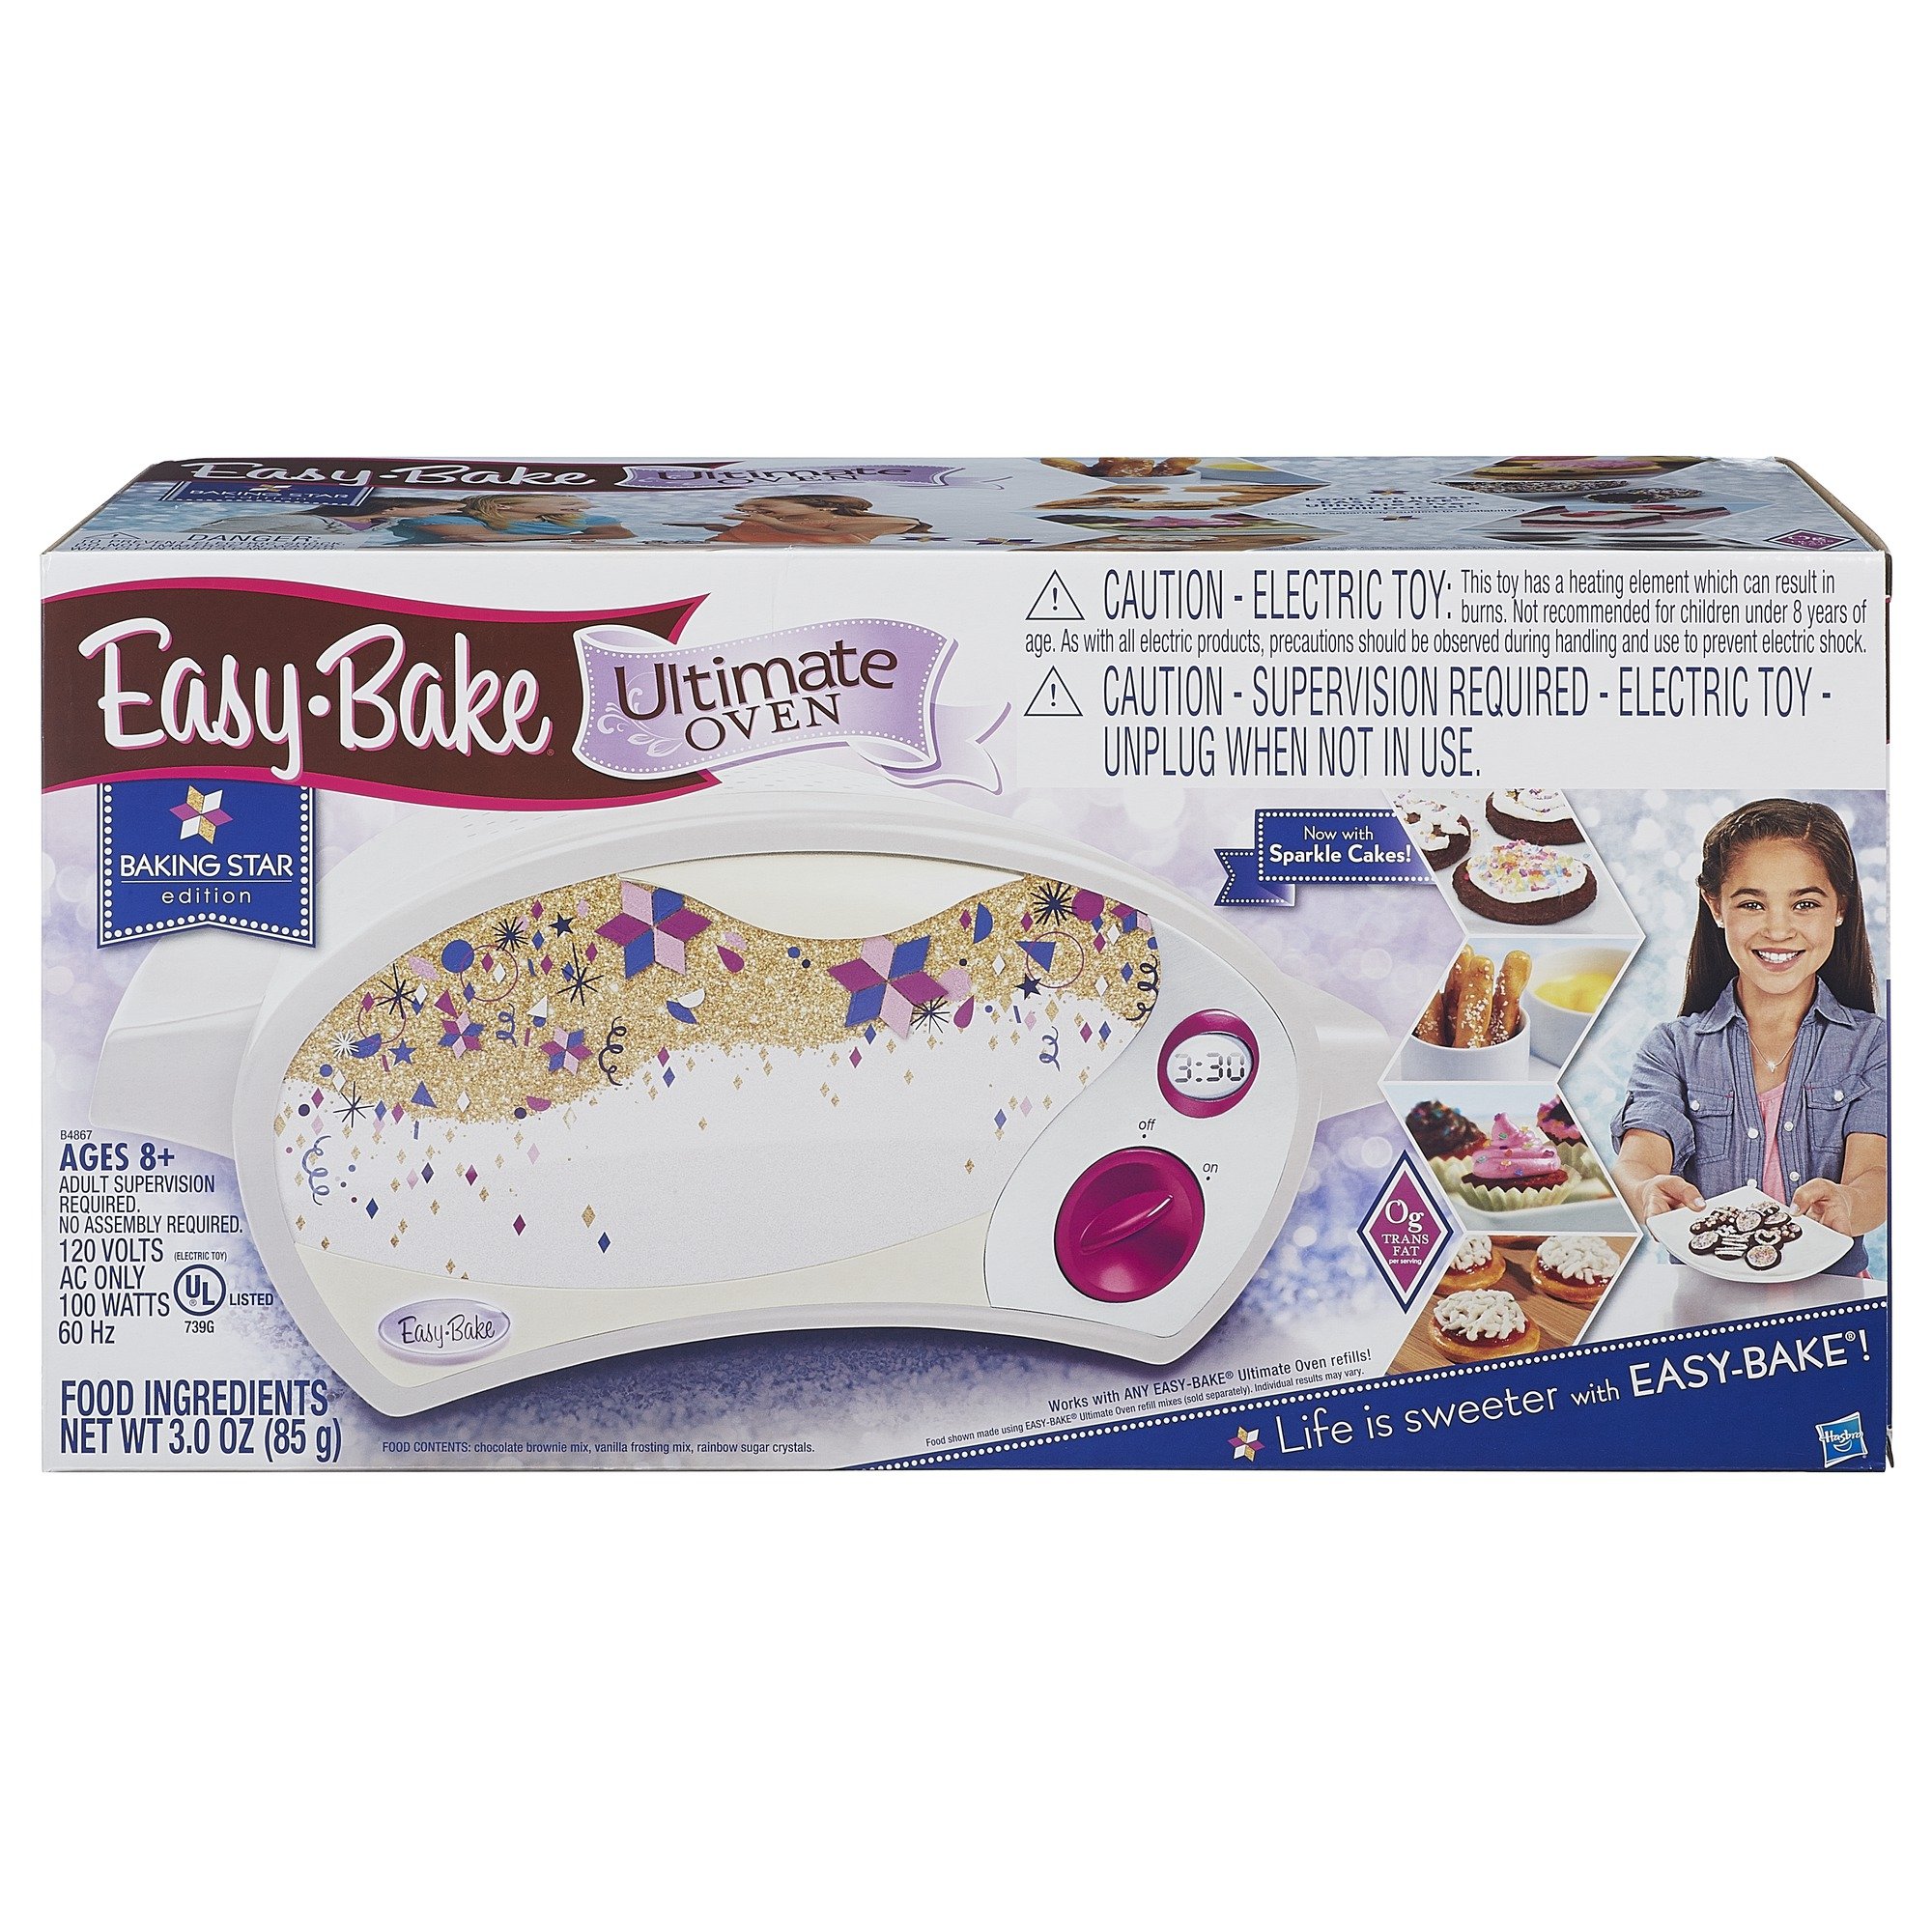 Easy-Bake Ultimate Oven Baking Star Edition - image 3 of 6